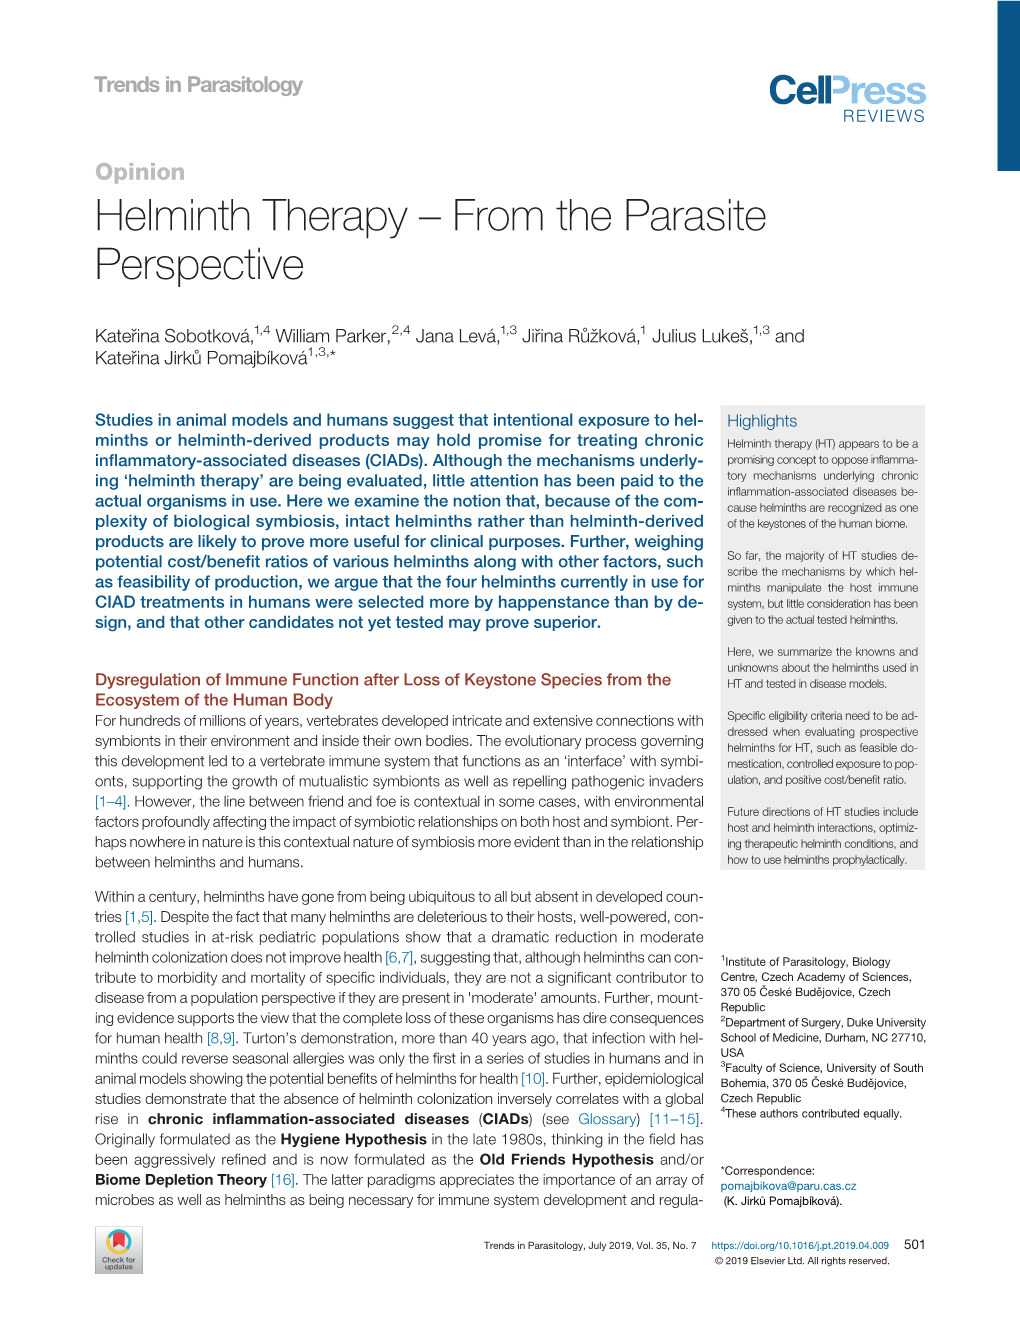 Helminth Therapy – from the Parasite Perspective